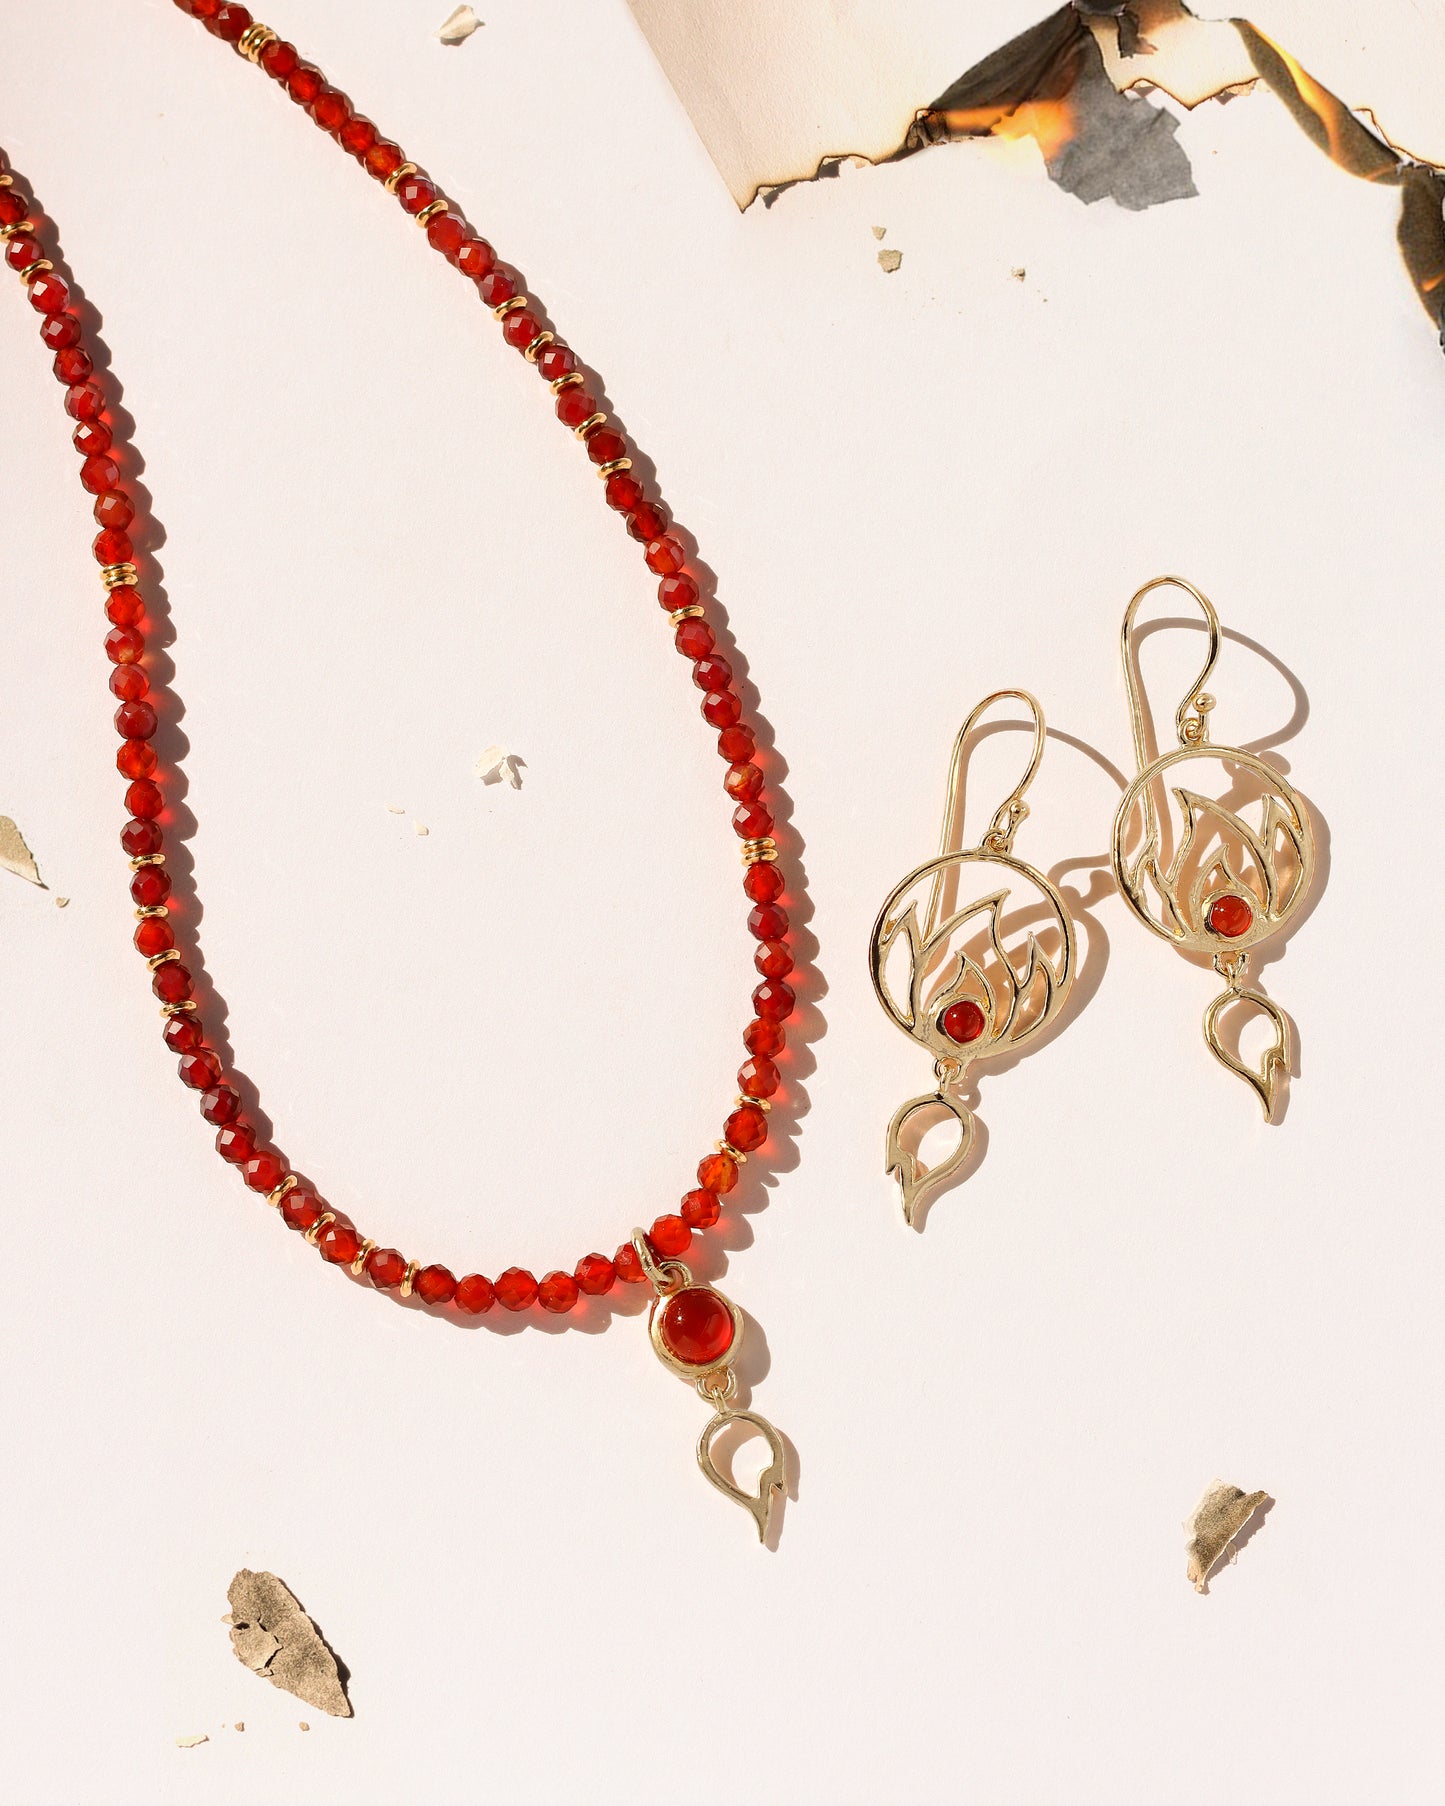 Carnelian Fire Element Beaded Necklace and Pendant